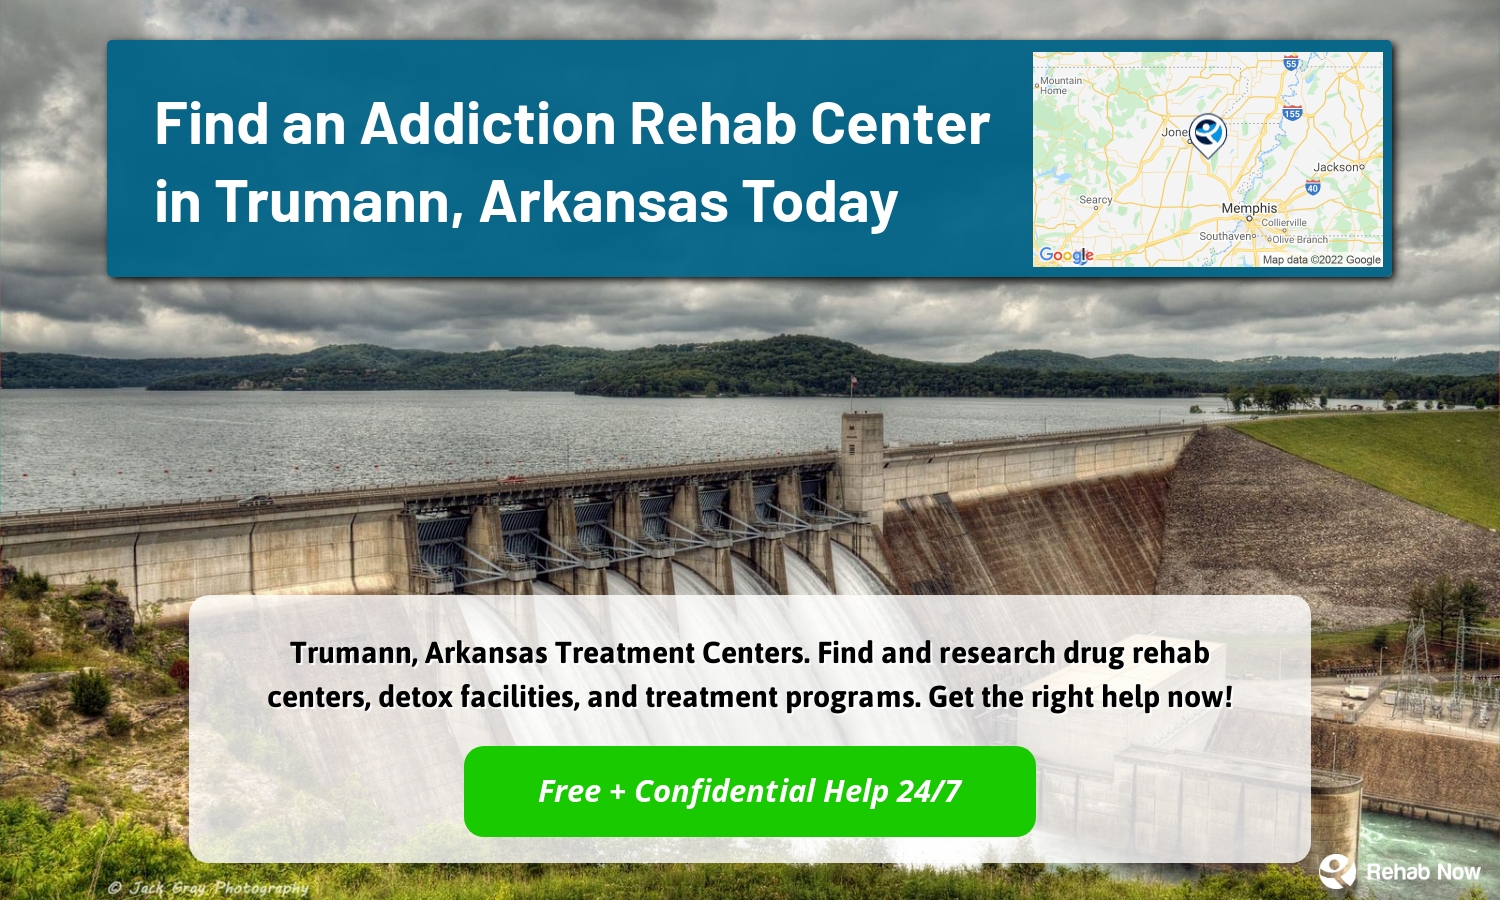 Trumann, Arkansas Treatment Centers. Find and research drug rehab centers, detox facilities, and treatment programs. Get the right help now!